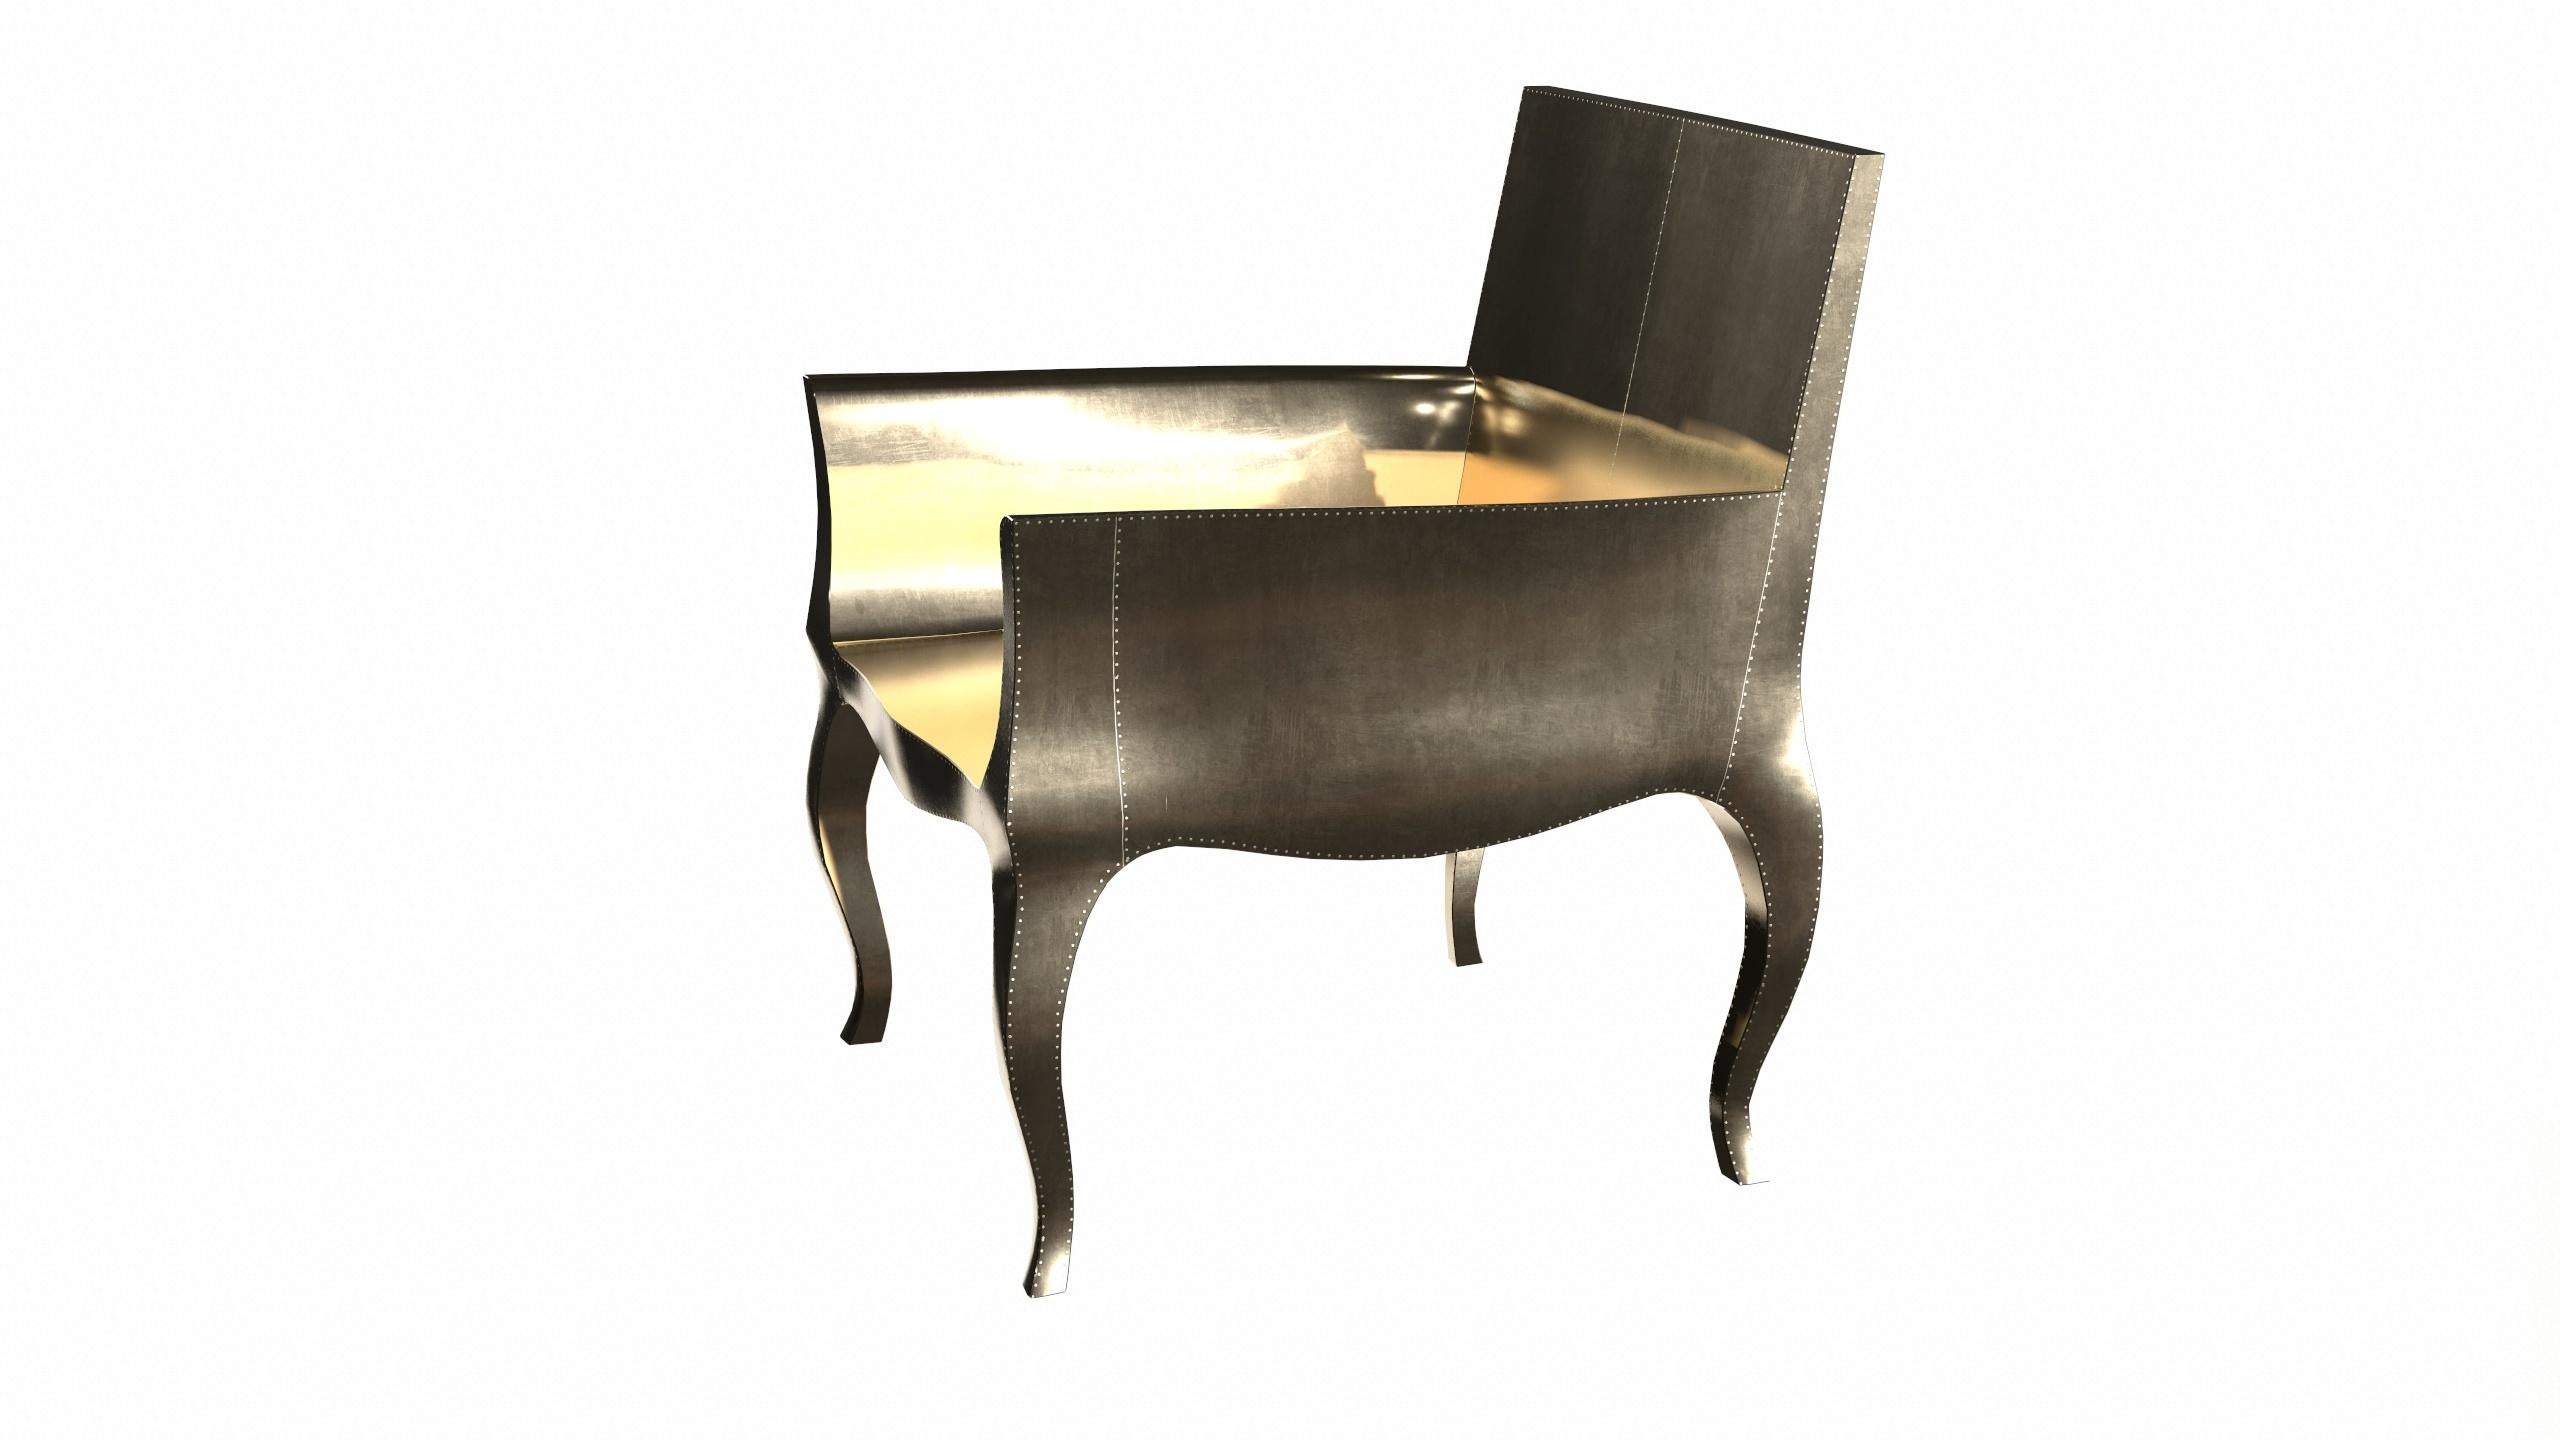 Indian Art Nouveau Chairs in Smooth Brass by Paul Mathieu for S. Odegard For Sale